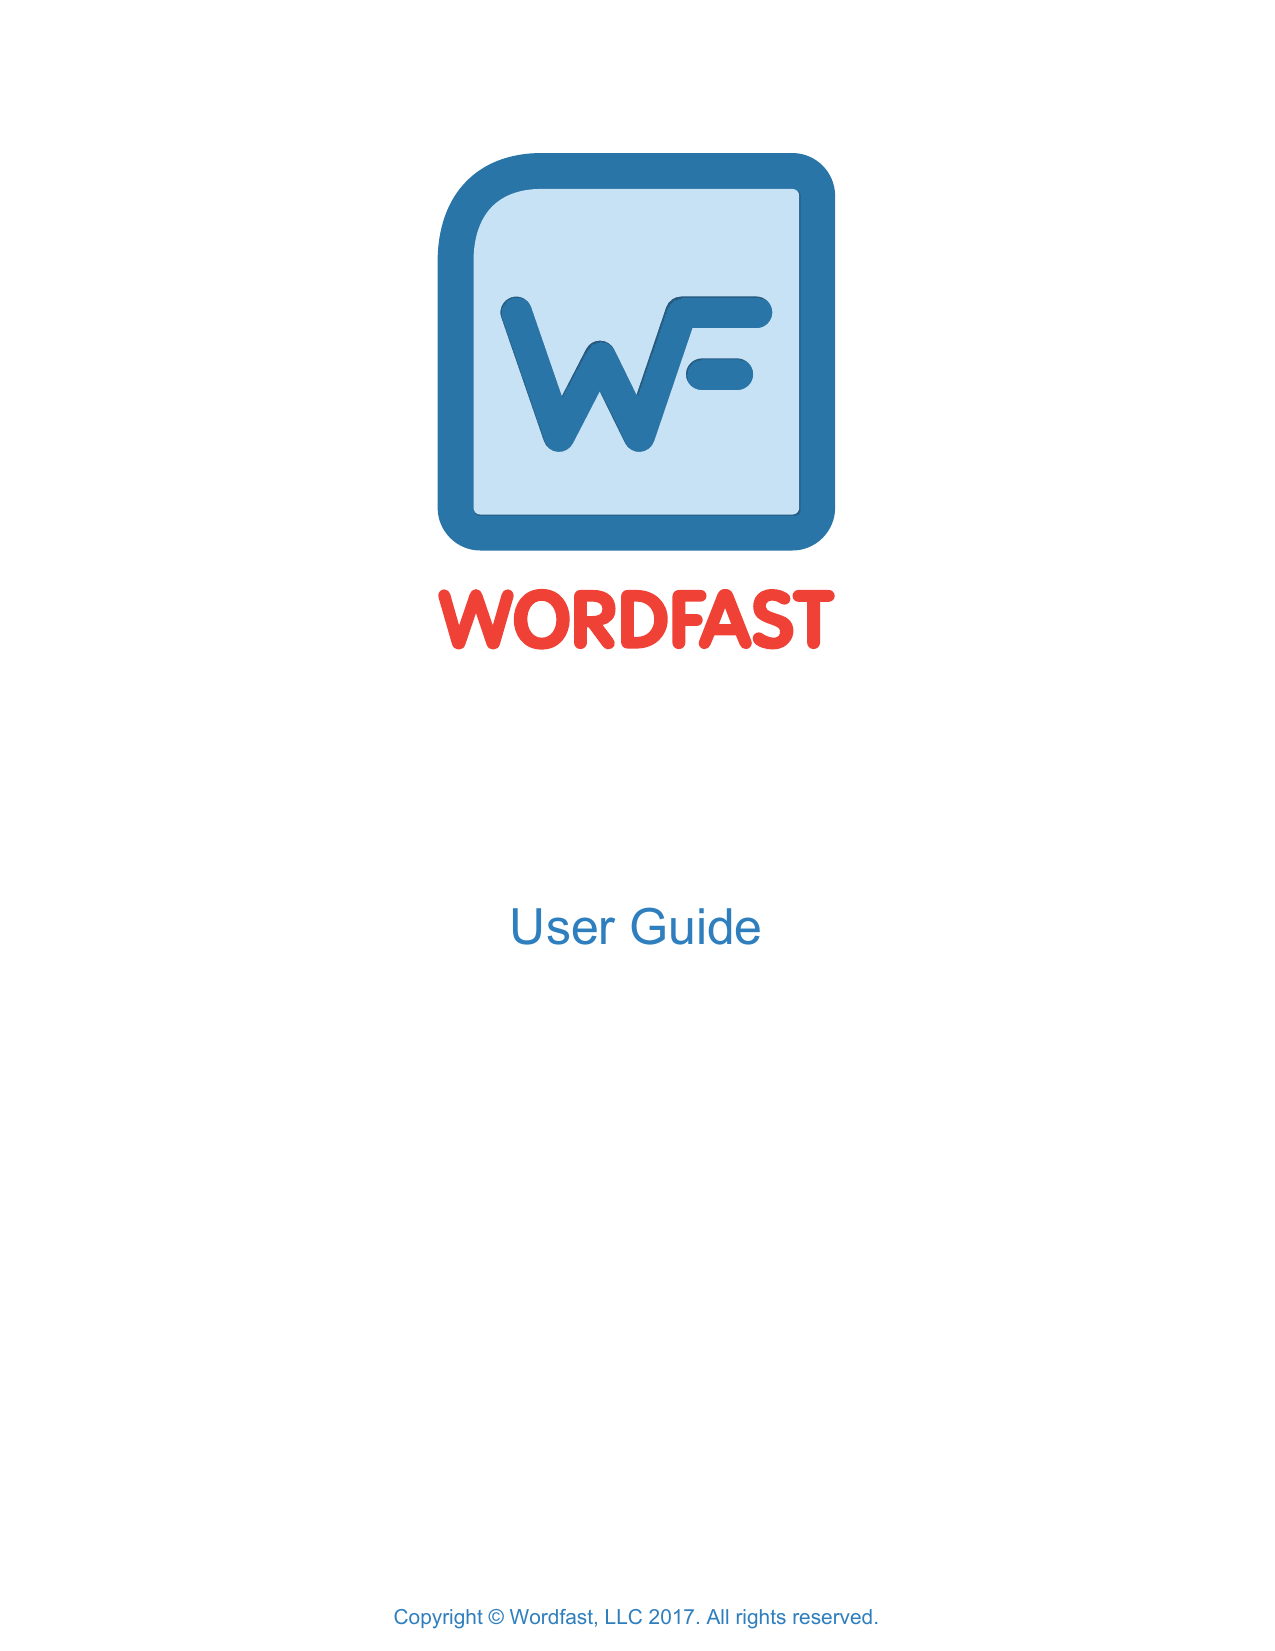 source and target texts alignmento for wordfast